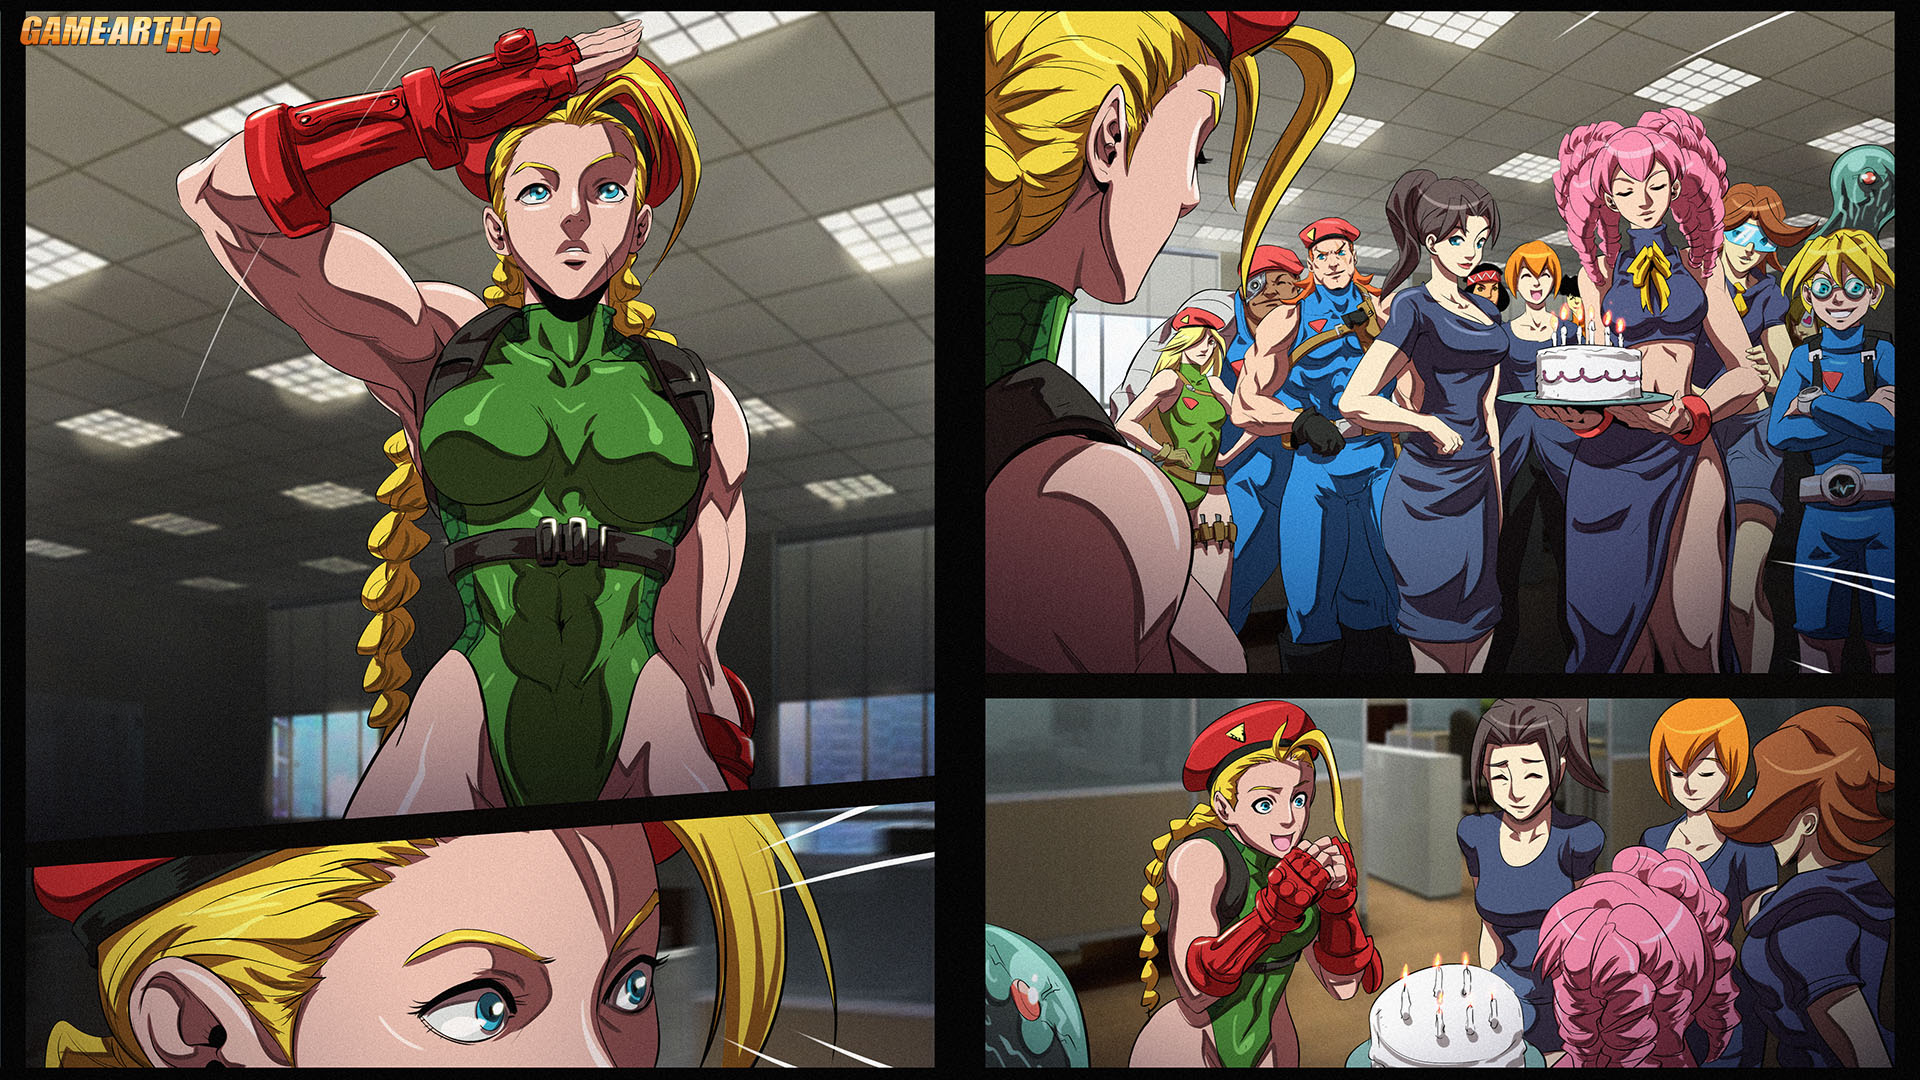 Street Fighter Cammy White by Nowlasd